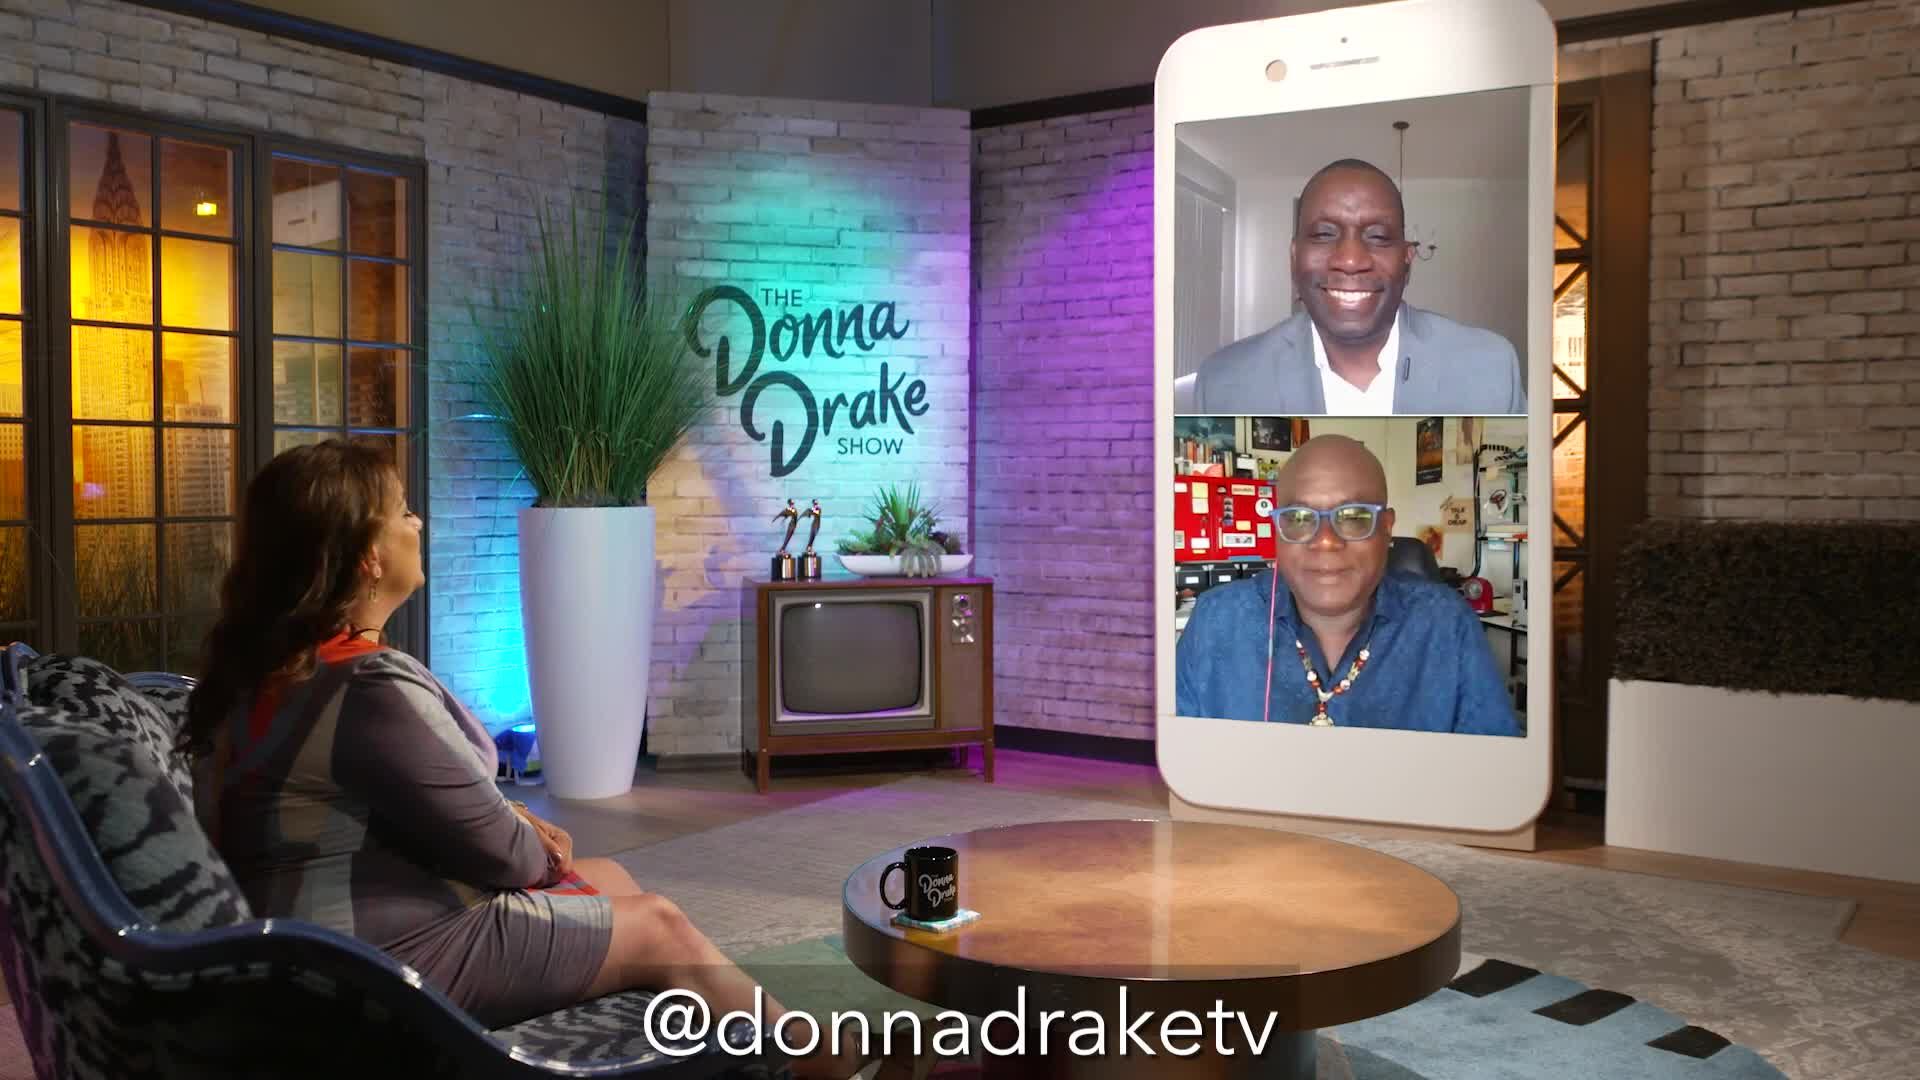 The Donna Drake Show Welcomes Barton Adams, Robin C. Adams and Gessie Mesamours